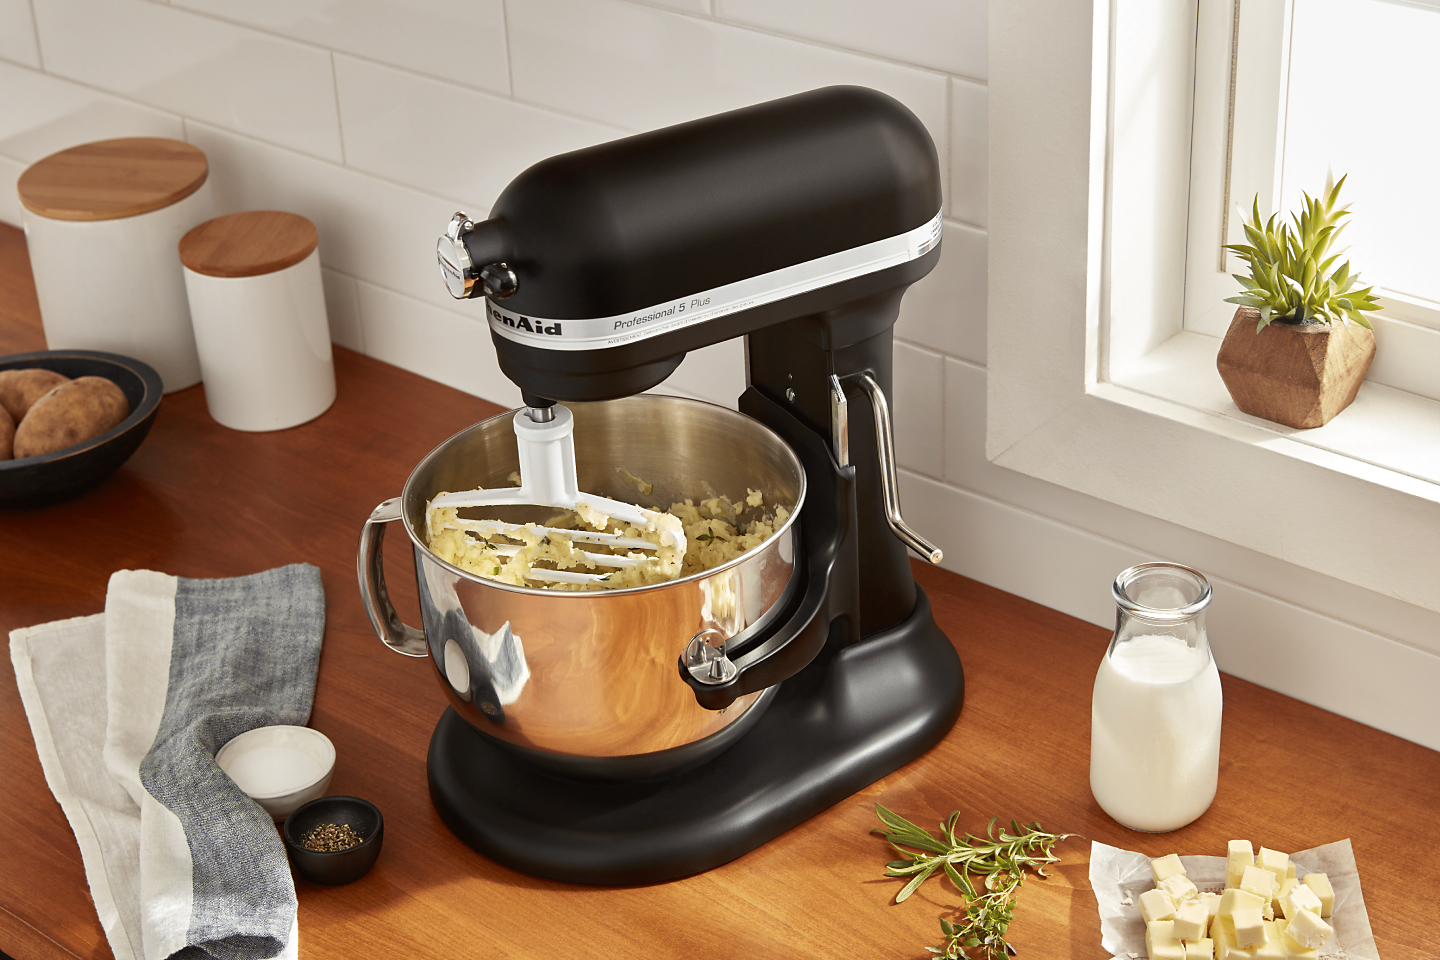 Mashed potatoes in a bowl-lift black stand mixer